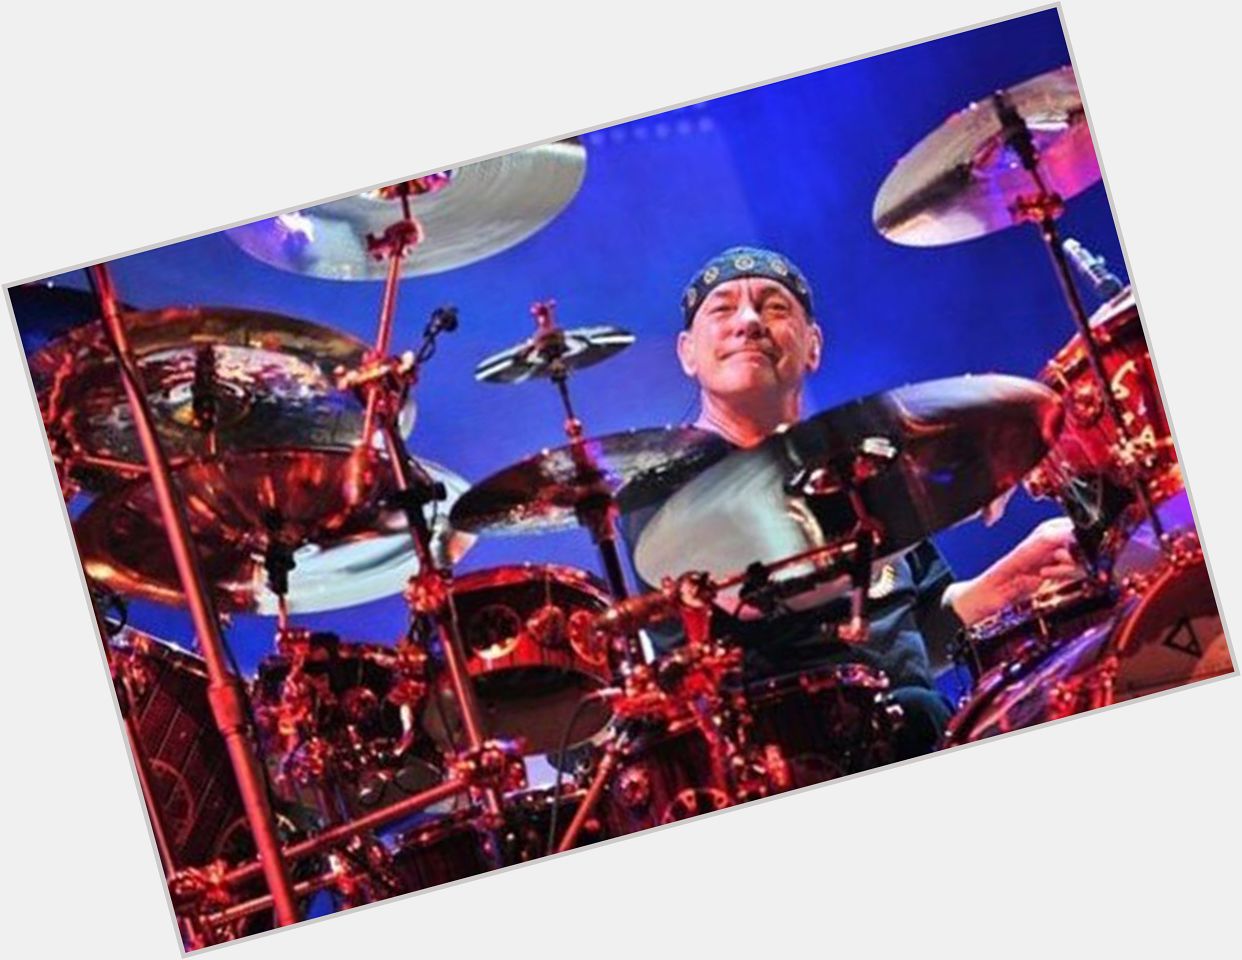 Happy birthday, Neil Peart!
You are creative, imaginative and the best drummer in the world!  